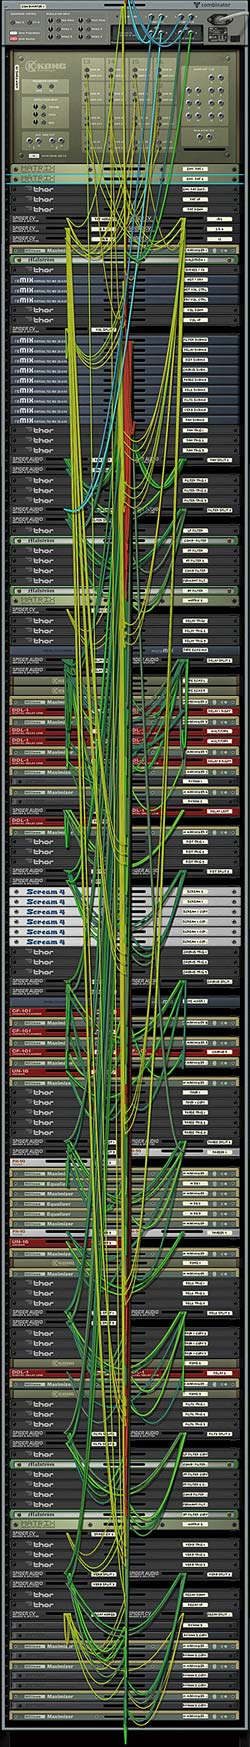 The Kong FX Chain builder from the back of the rack